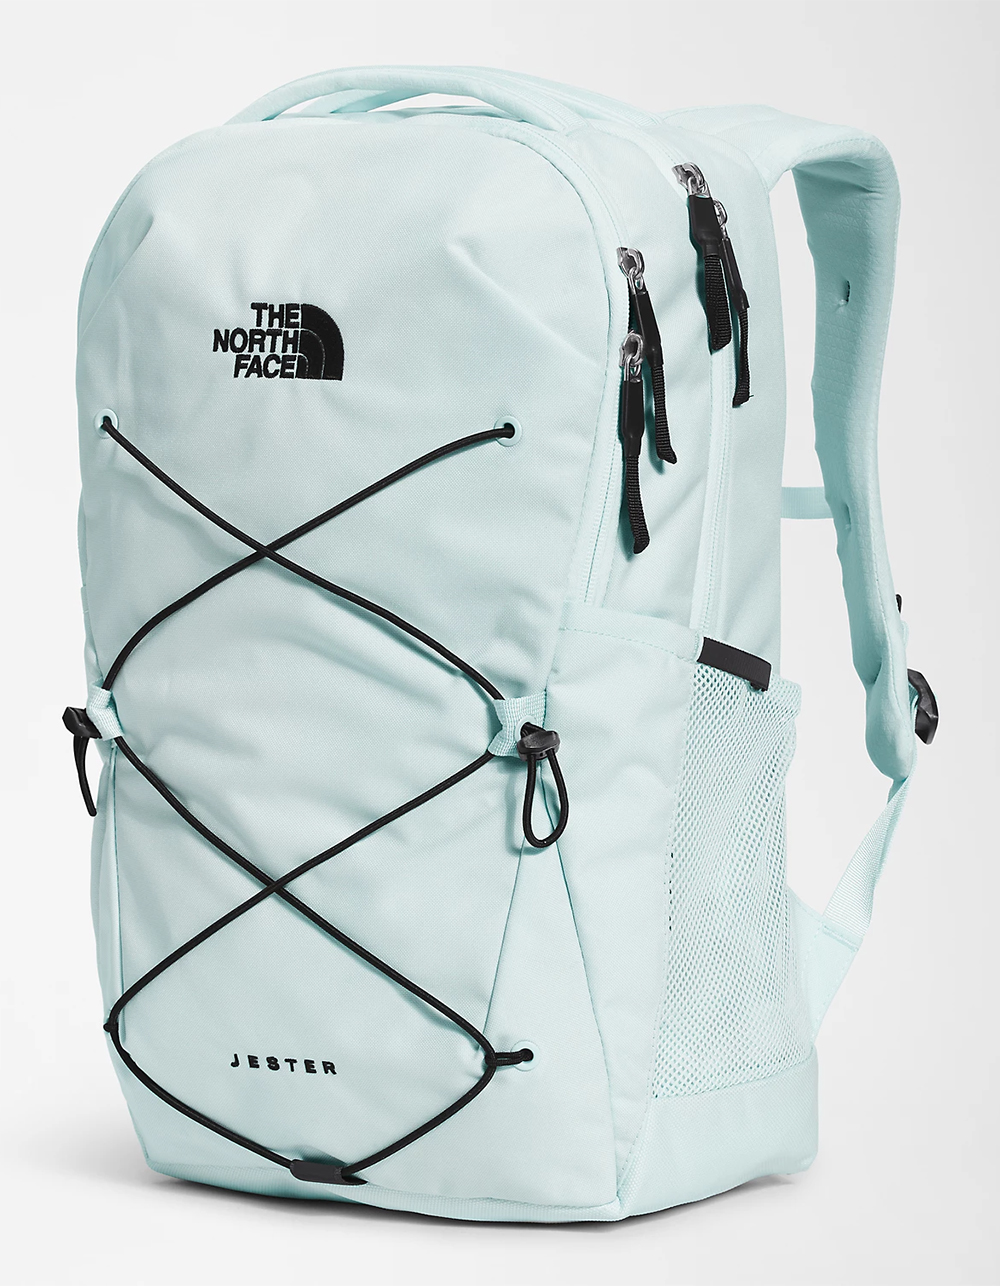 THE NORTH FACE Jester Womens Backpack - LIGHT BLUE | Tillys